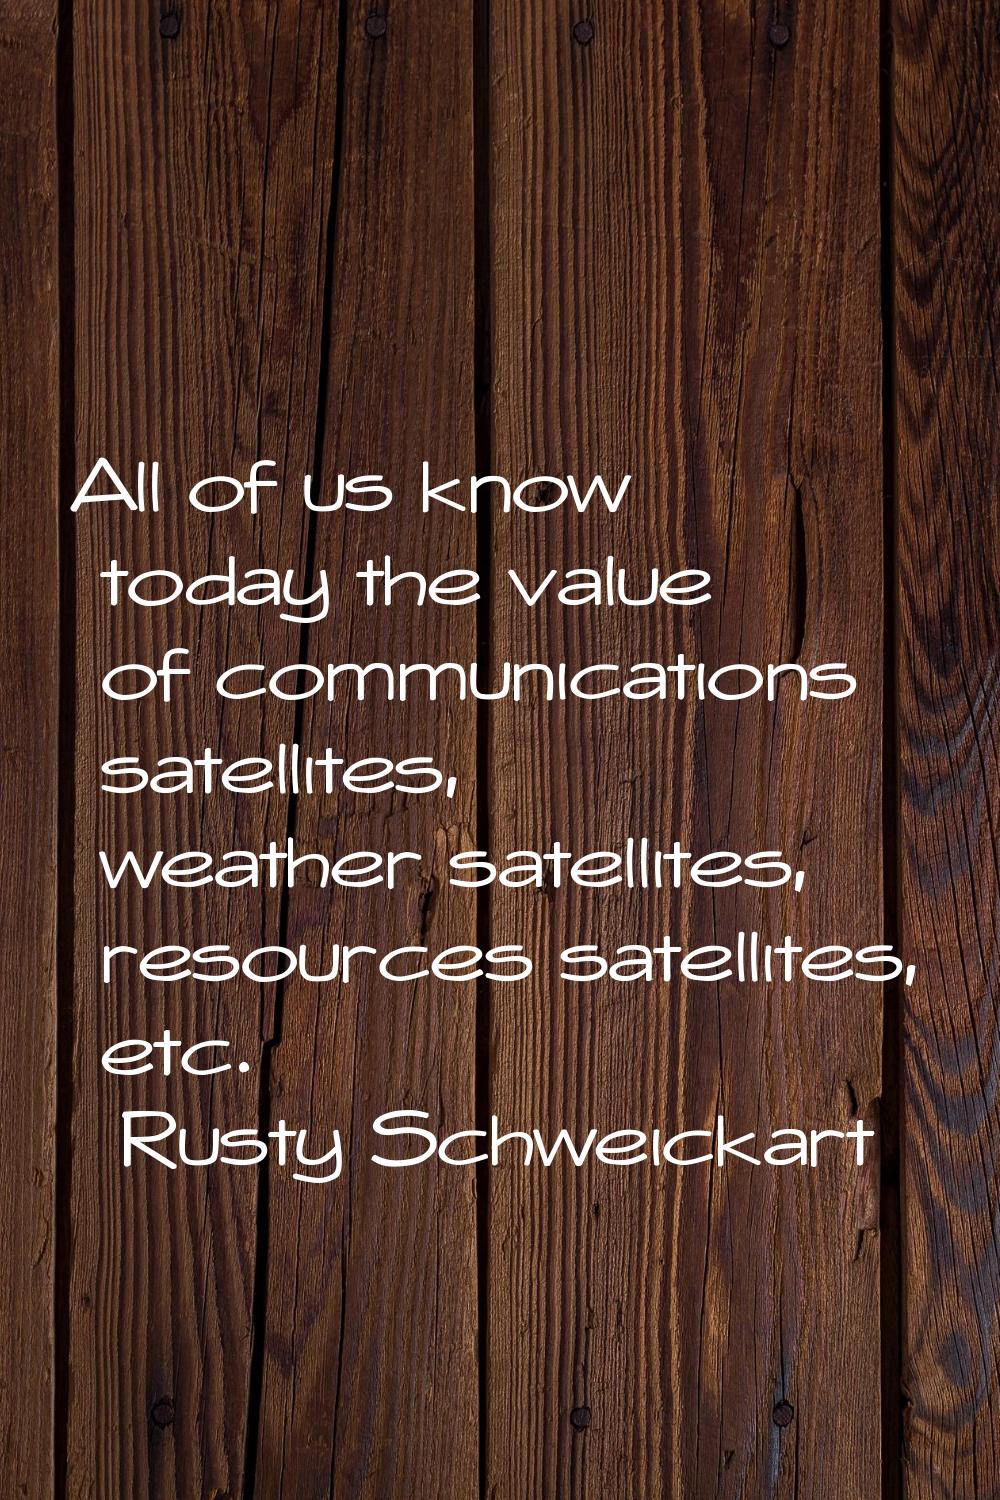 All of us know today the value of communications satellites, weather satellites, resources satellit